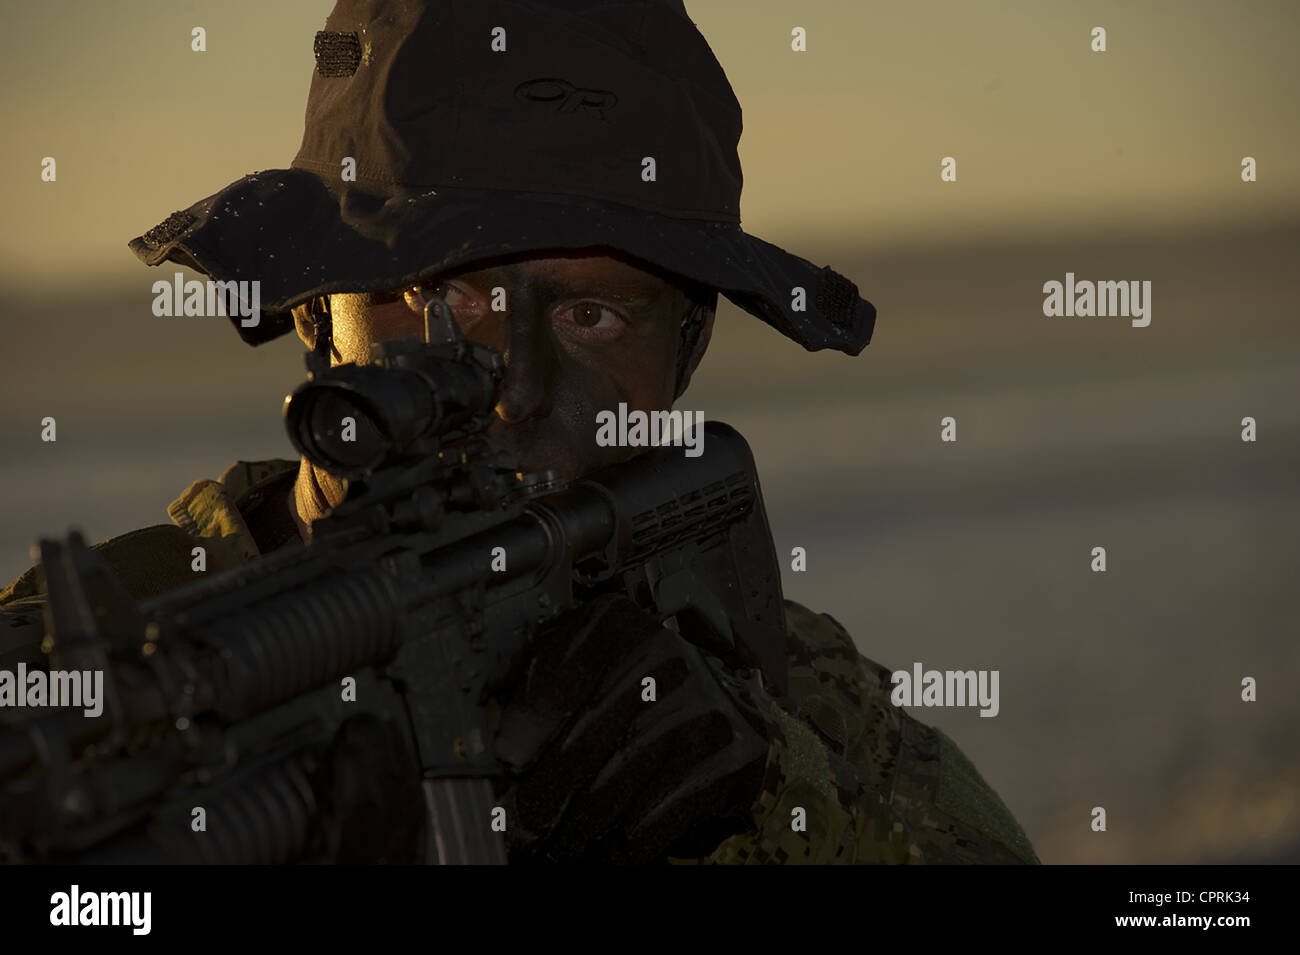 A US Navy SEAL during water training at sunset January 9, 2012 in Coronado, CA. Stock Photo